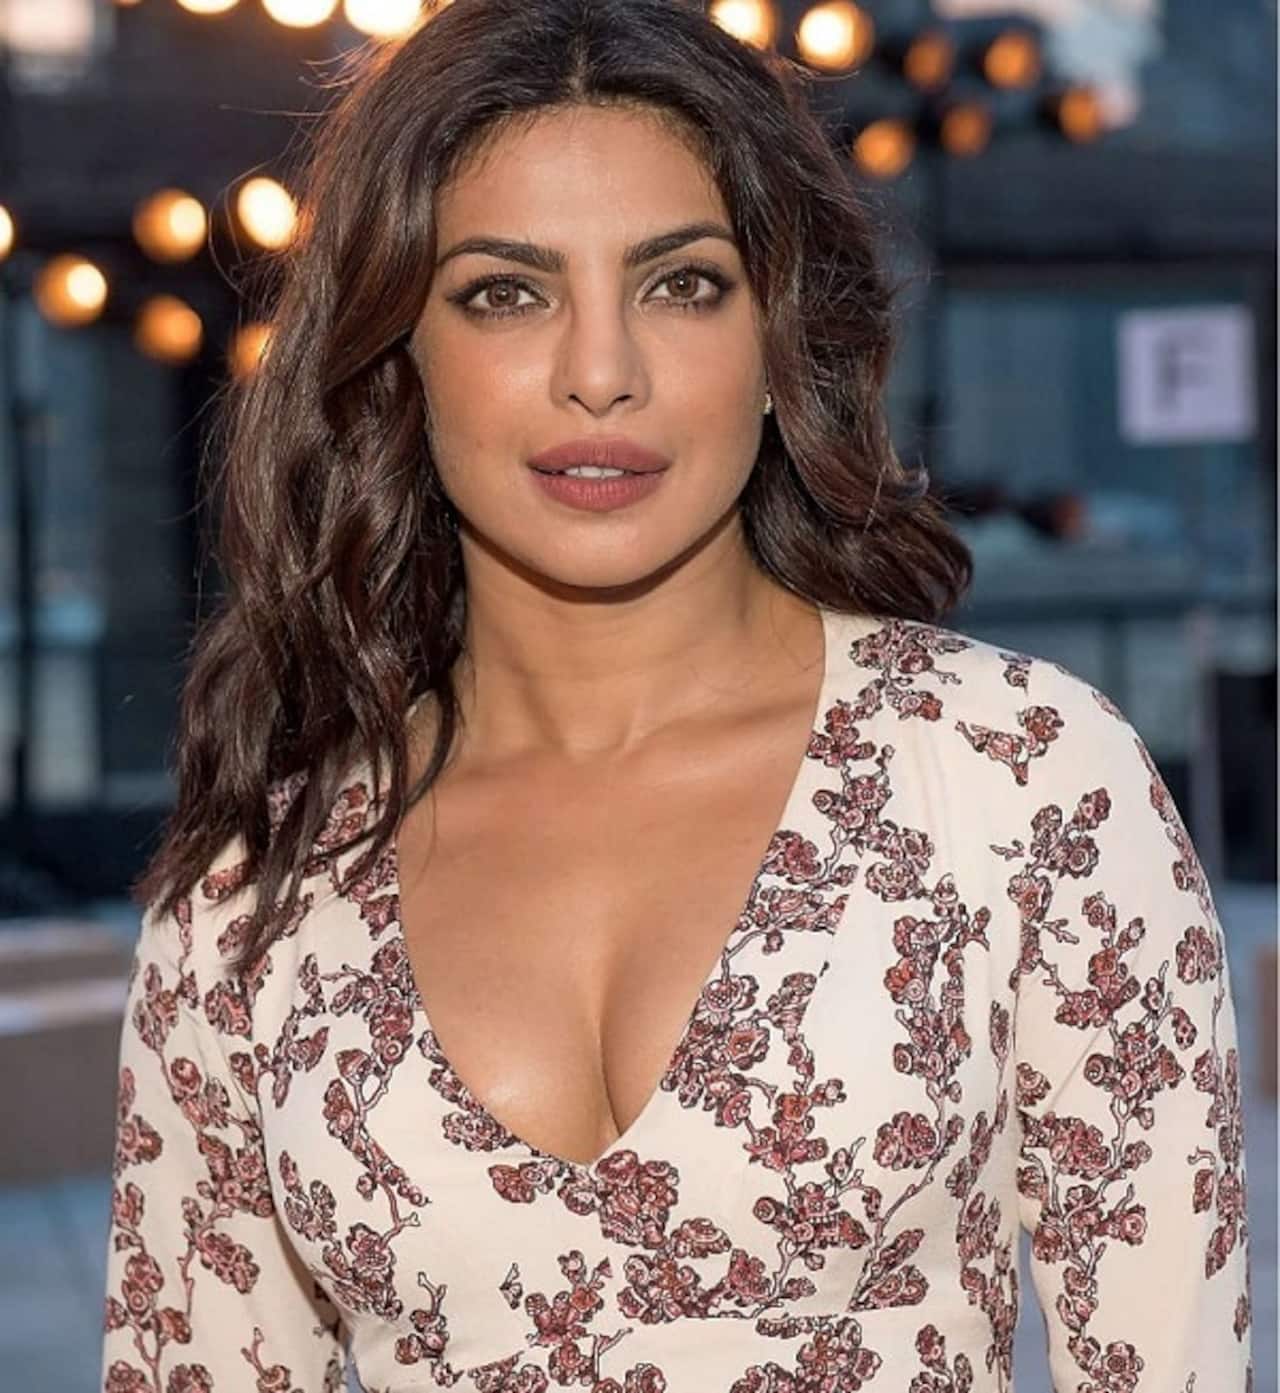 Priyanka Chopra voices her opinion against Donald Trump's immigrant ban in a powerful post